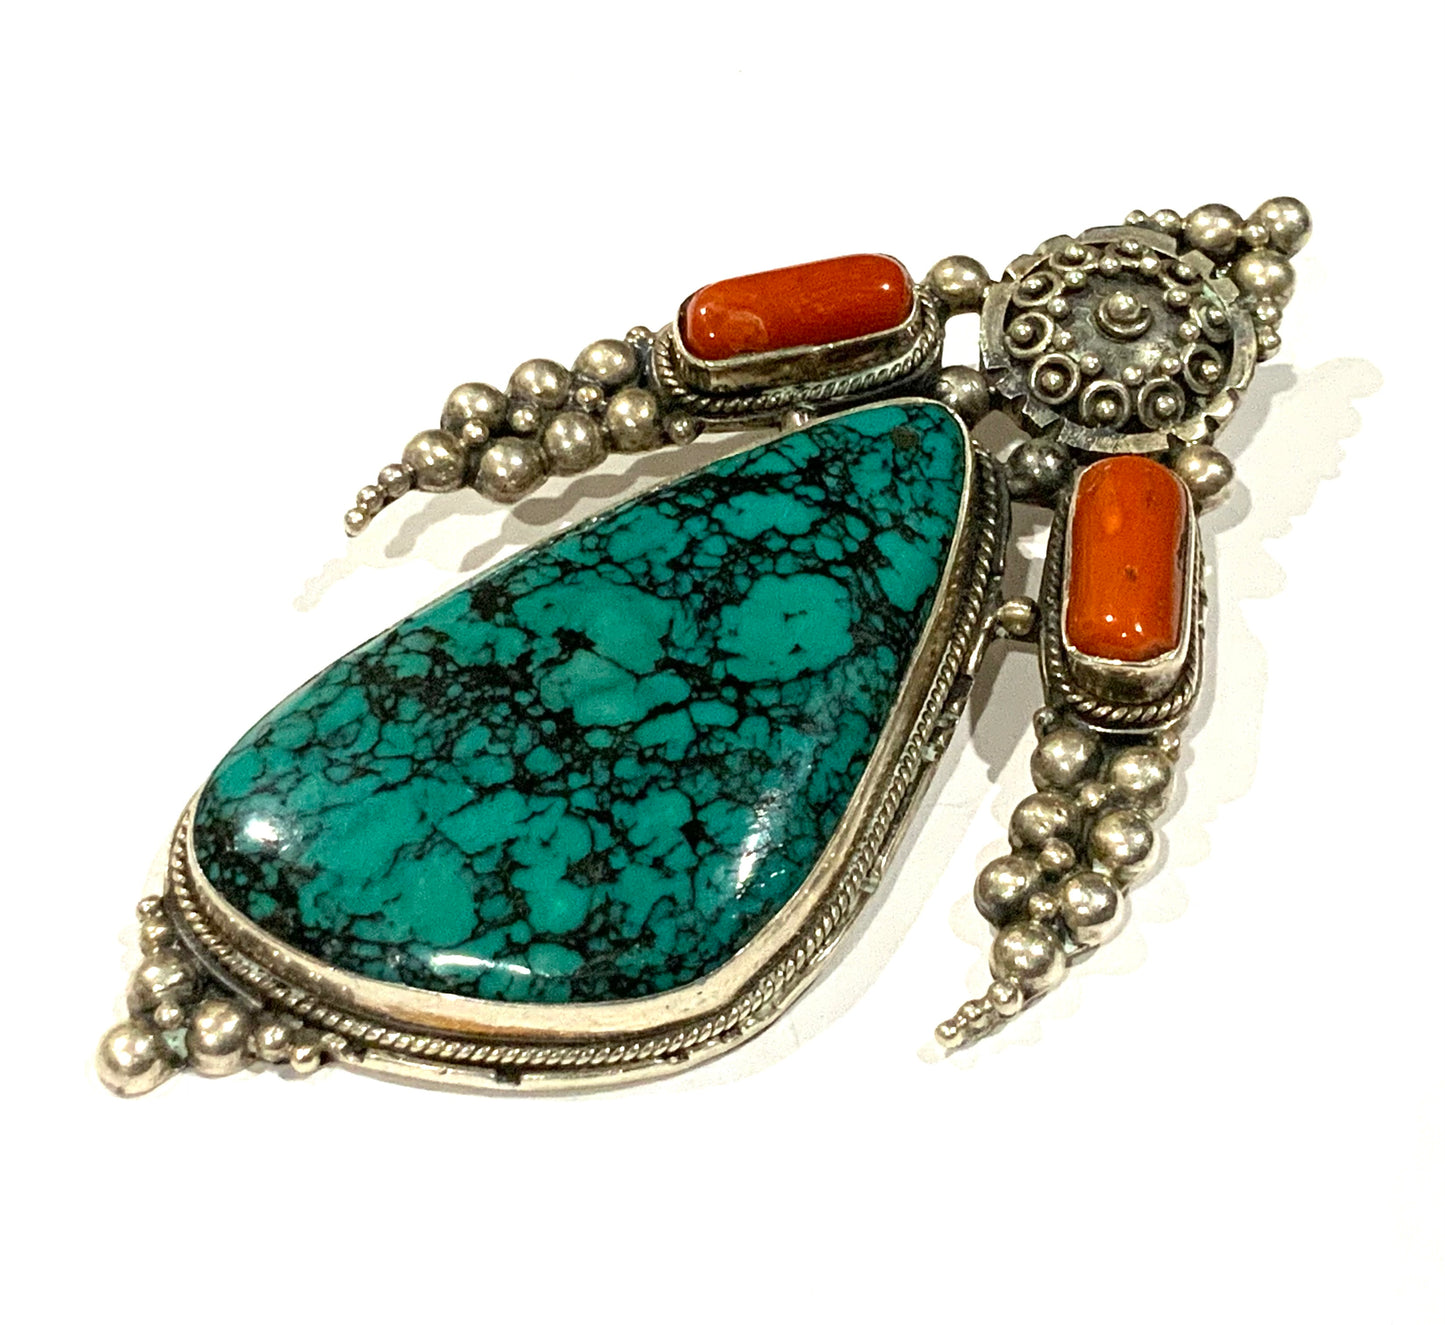 Native American Corn Maiden Turquoise & Sterling Silver Pendant Necklace